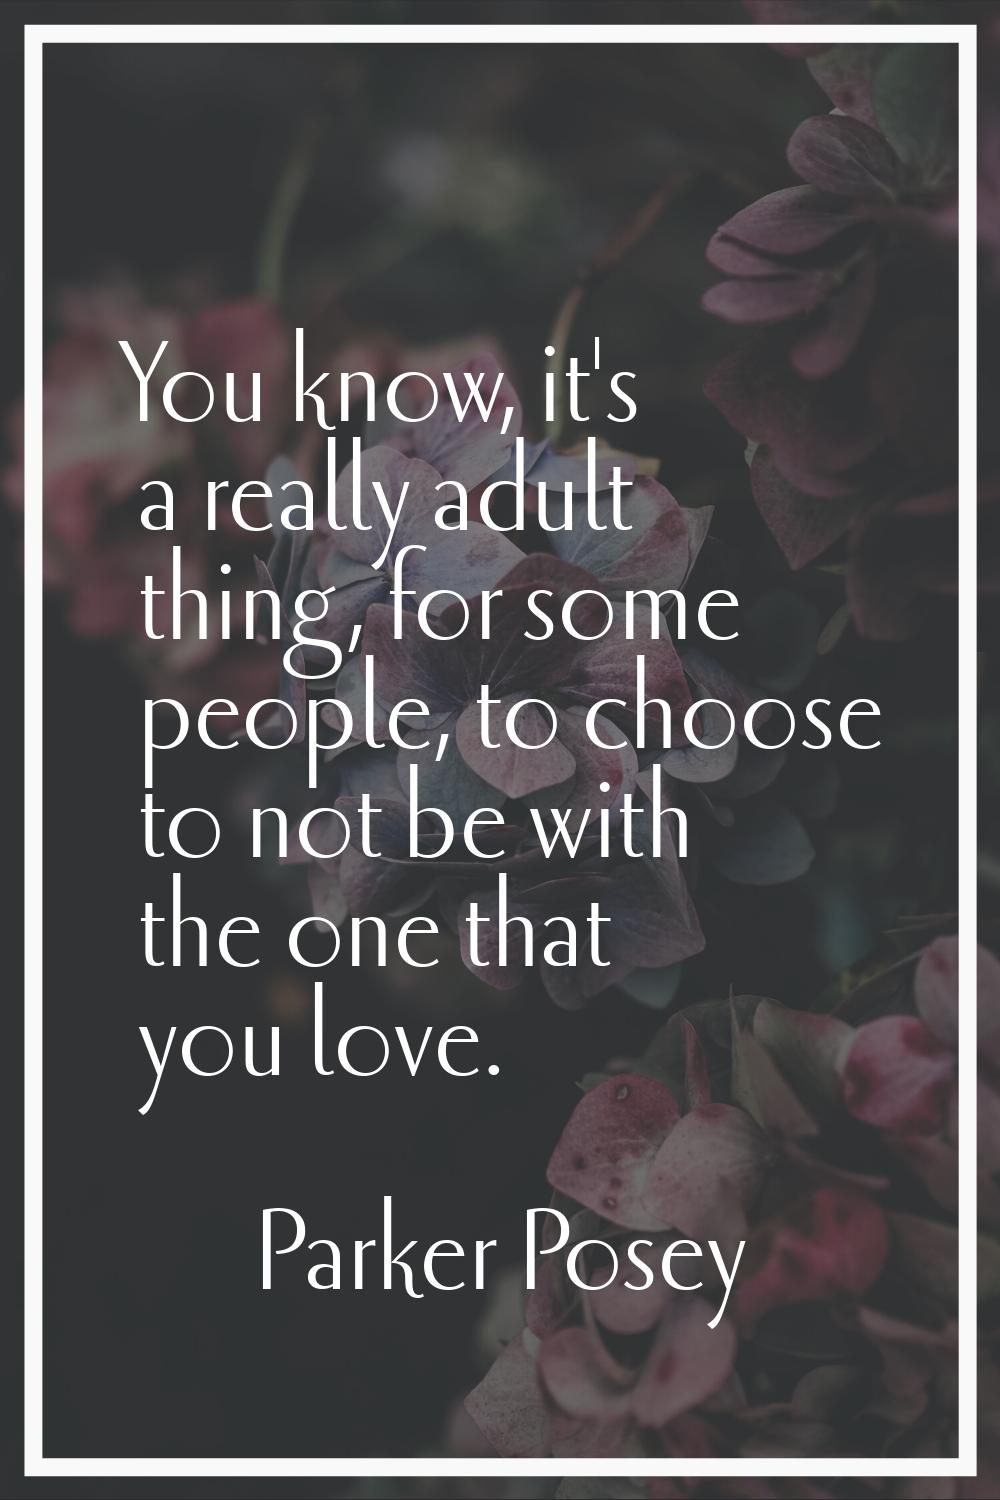 You know, it's a really adult thing, for some people, to choose to not be with the one that you lov